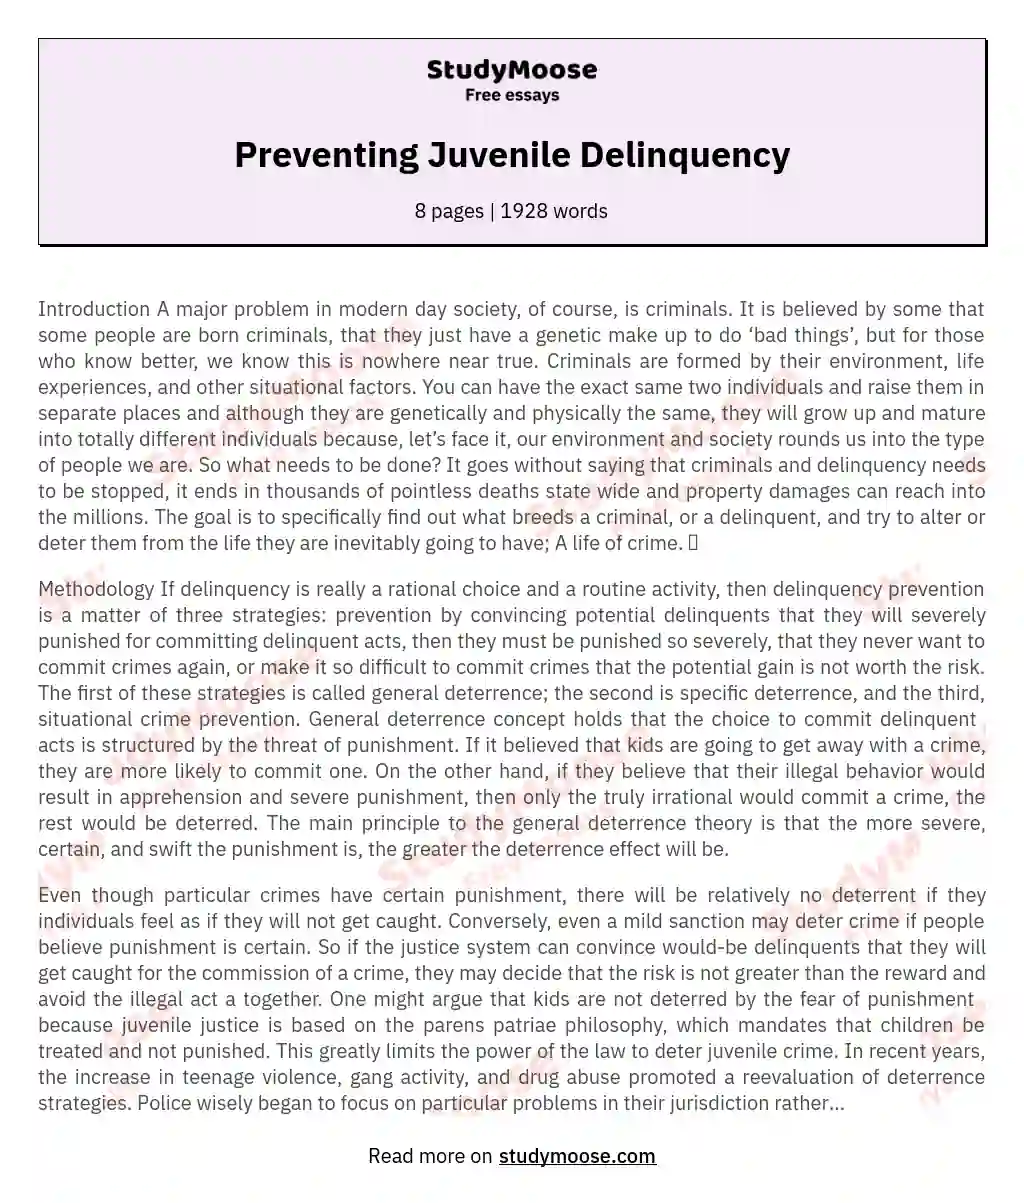 how to prevent juvenile delinquency essay philippines